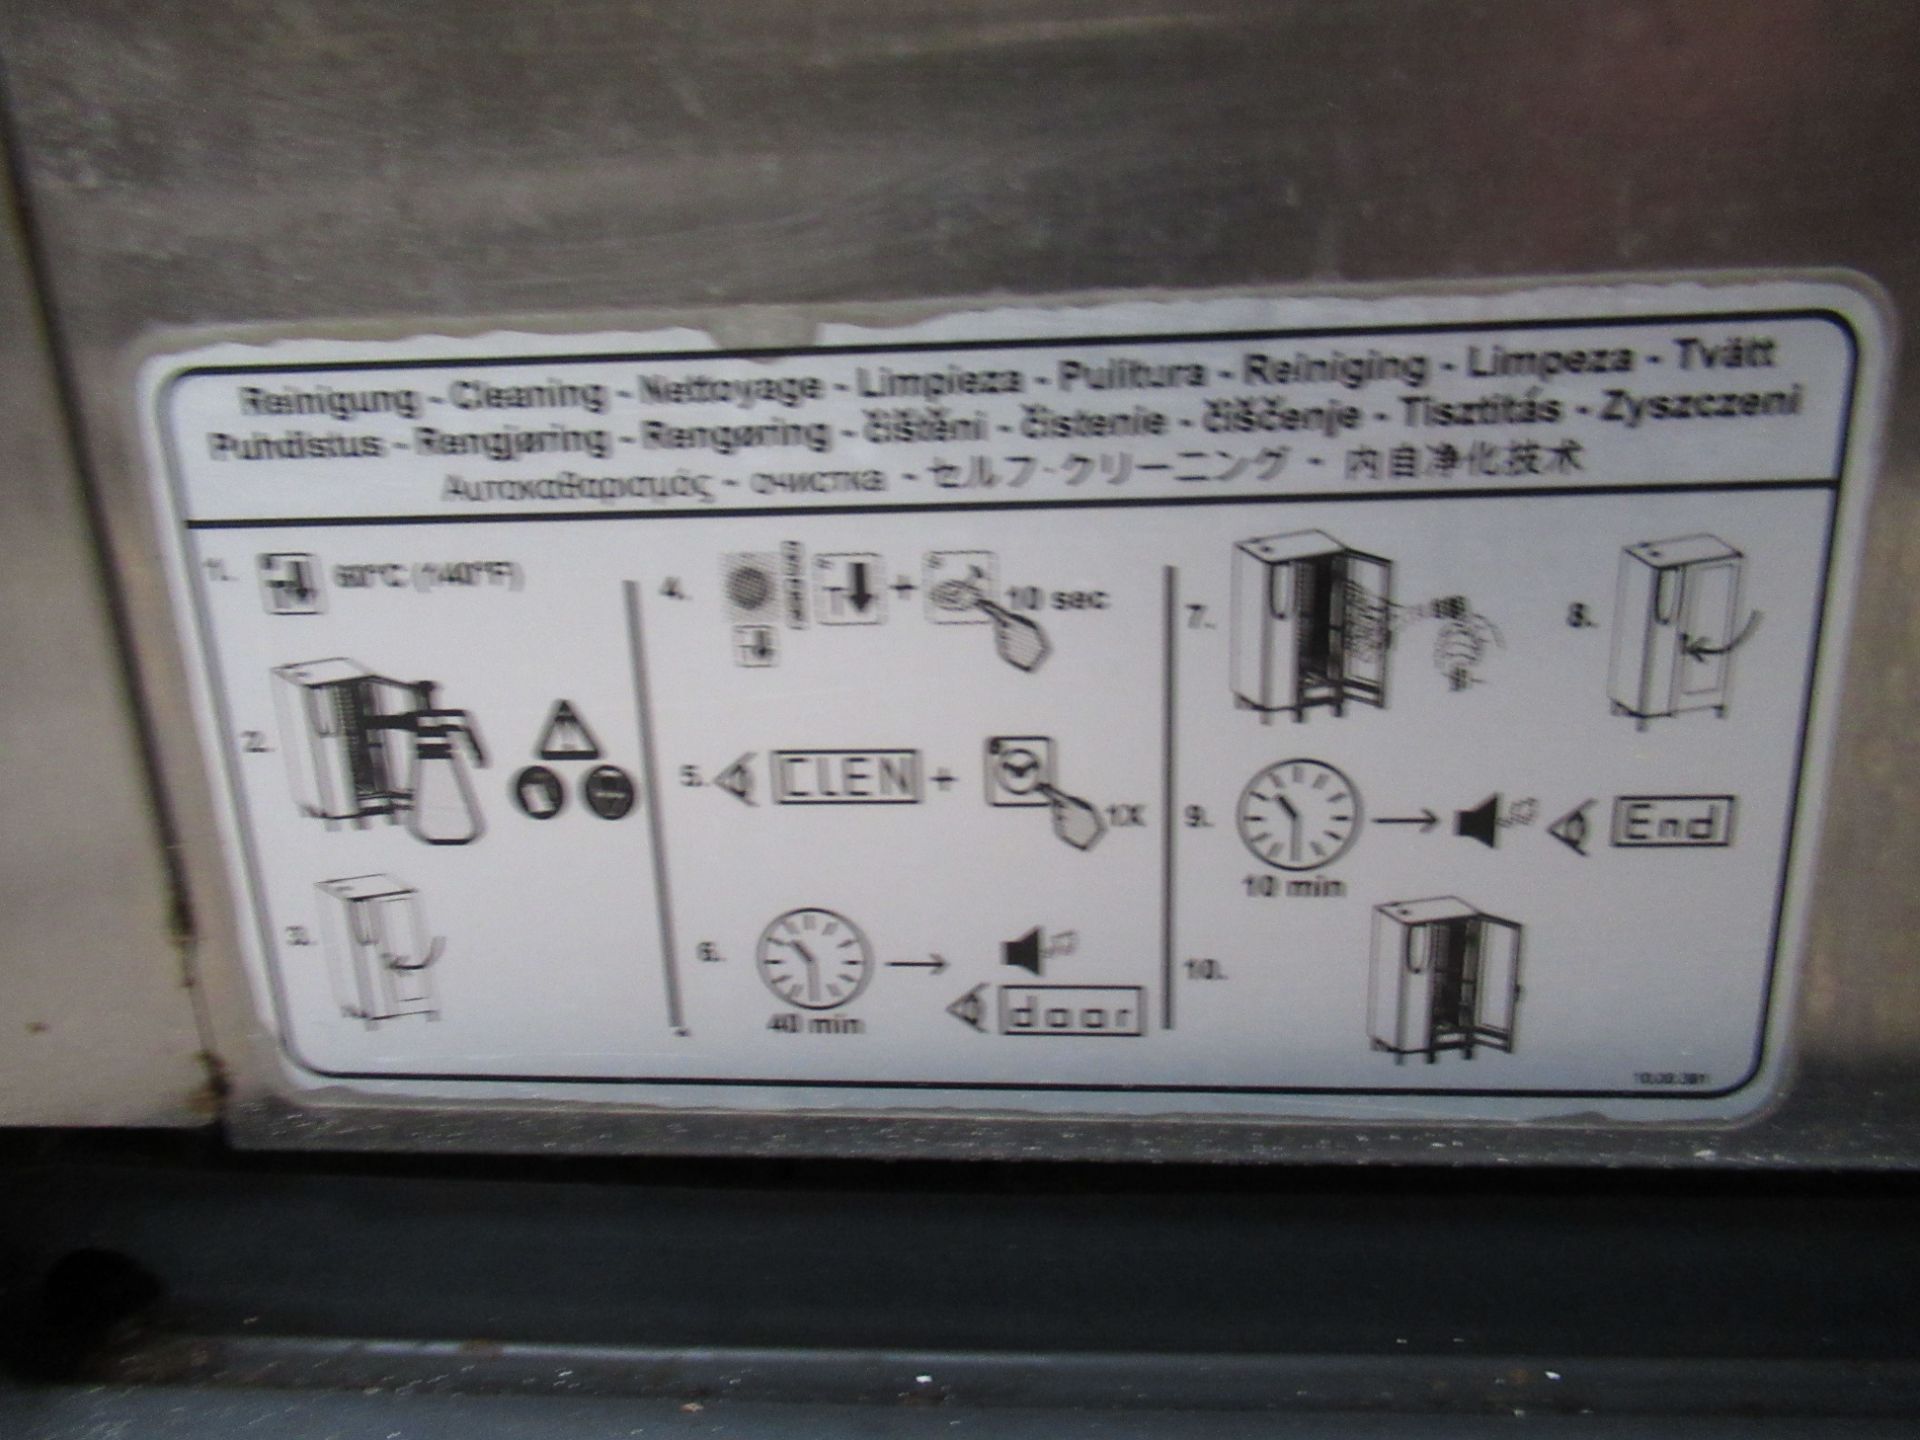 A Rational Combimaster Stainless steel oven. - Image 7 of 7